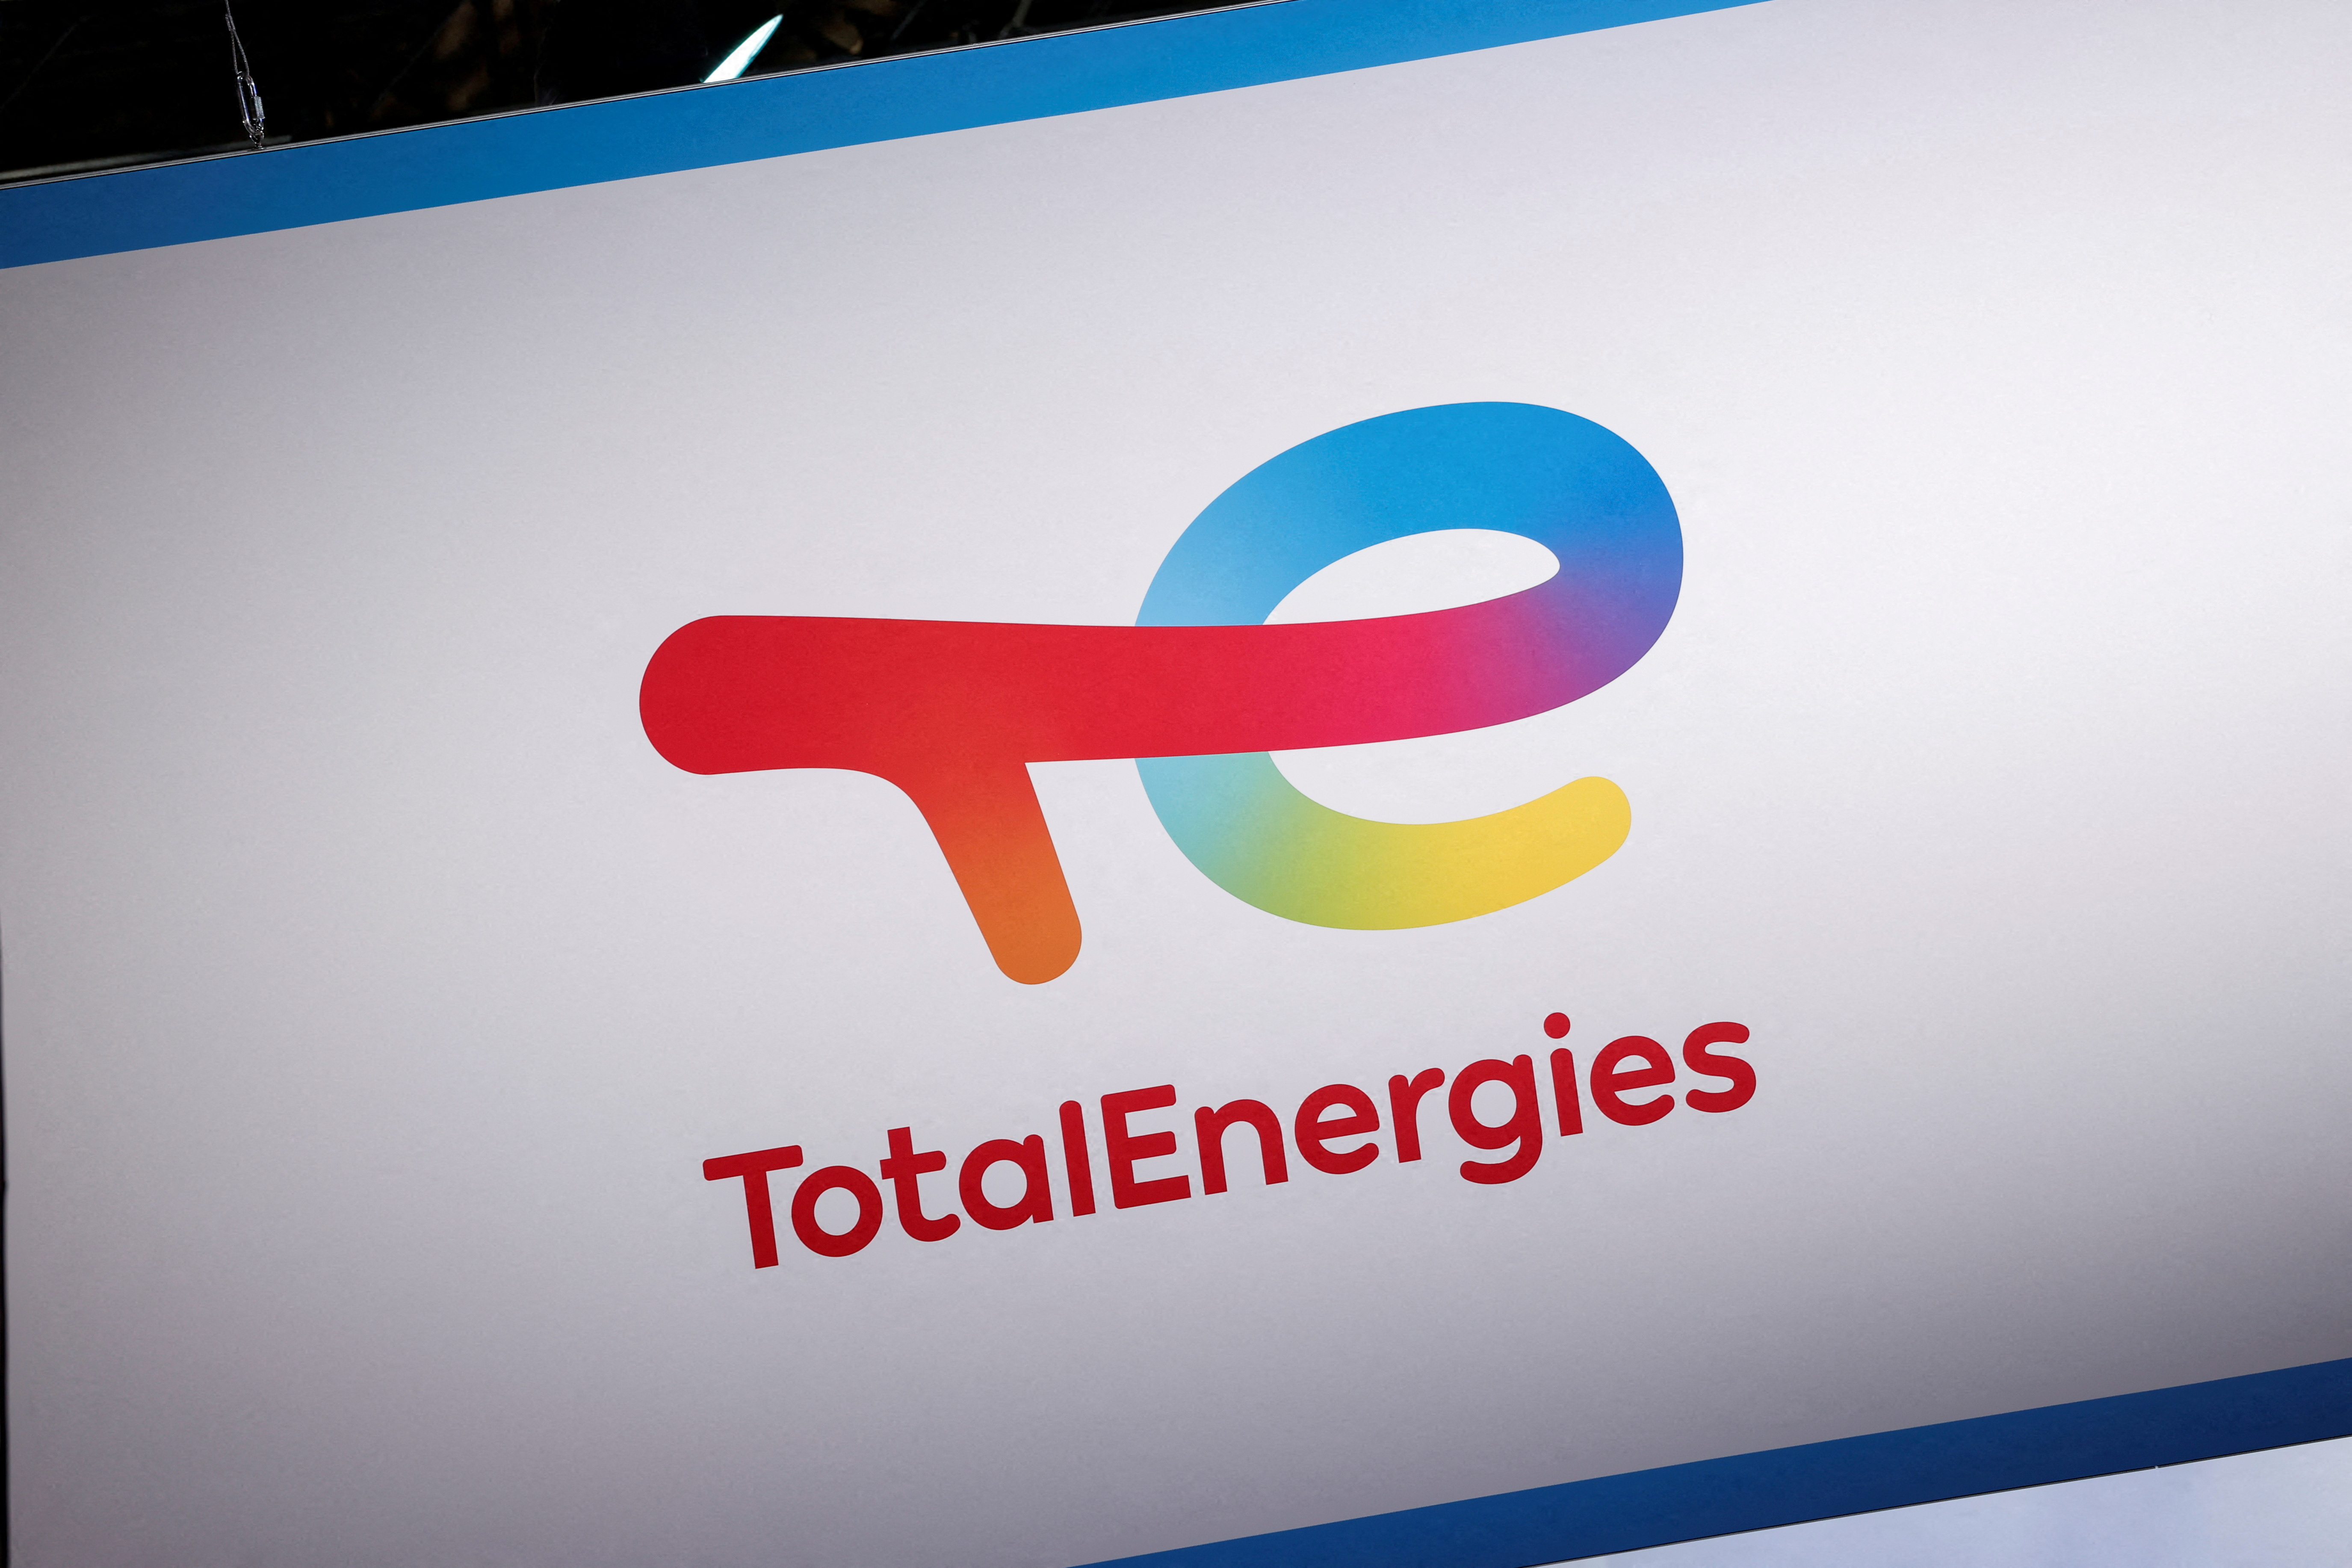 A logo of TotalEnergies at the Viva Technology conference at Porte de Versailles exhibition centre in Paris, France